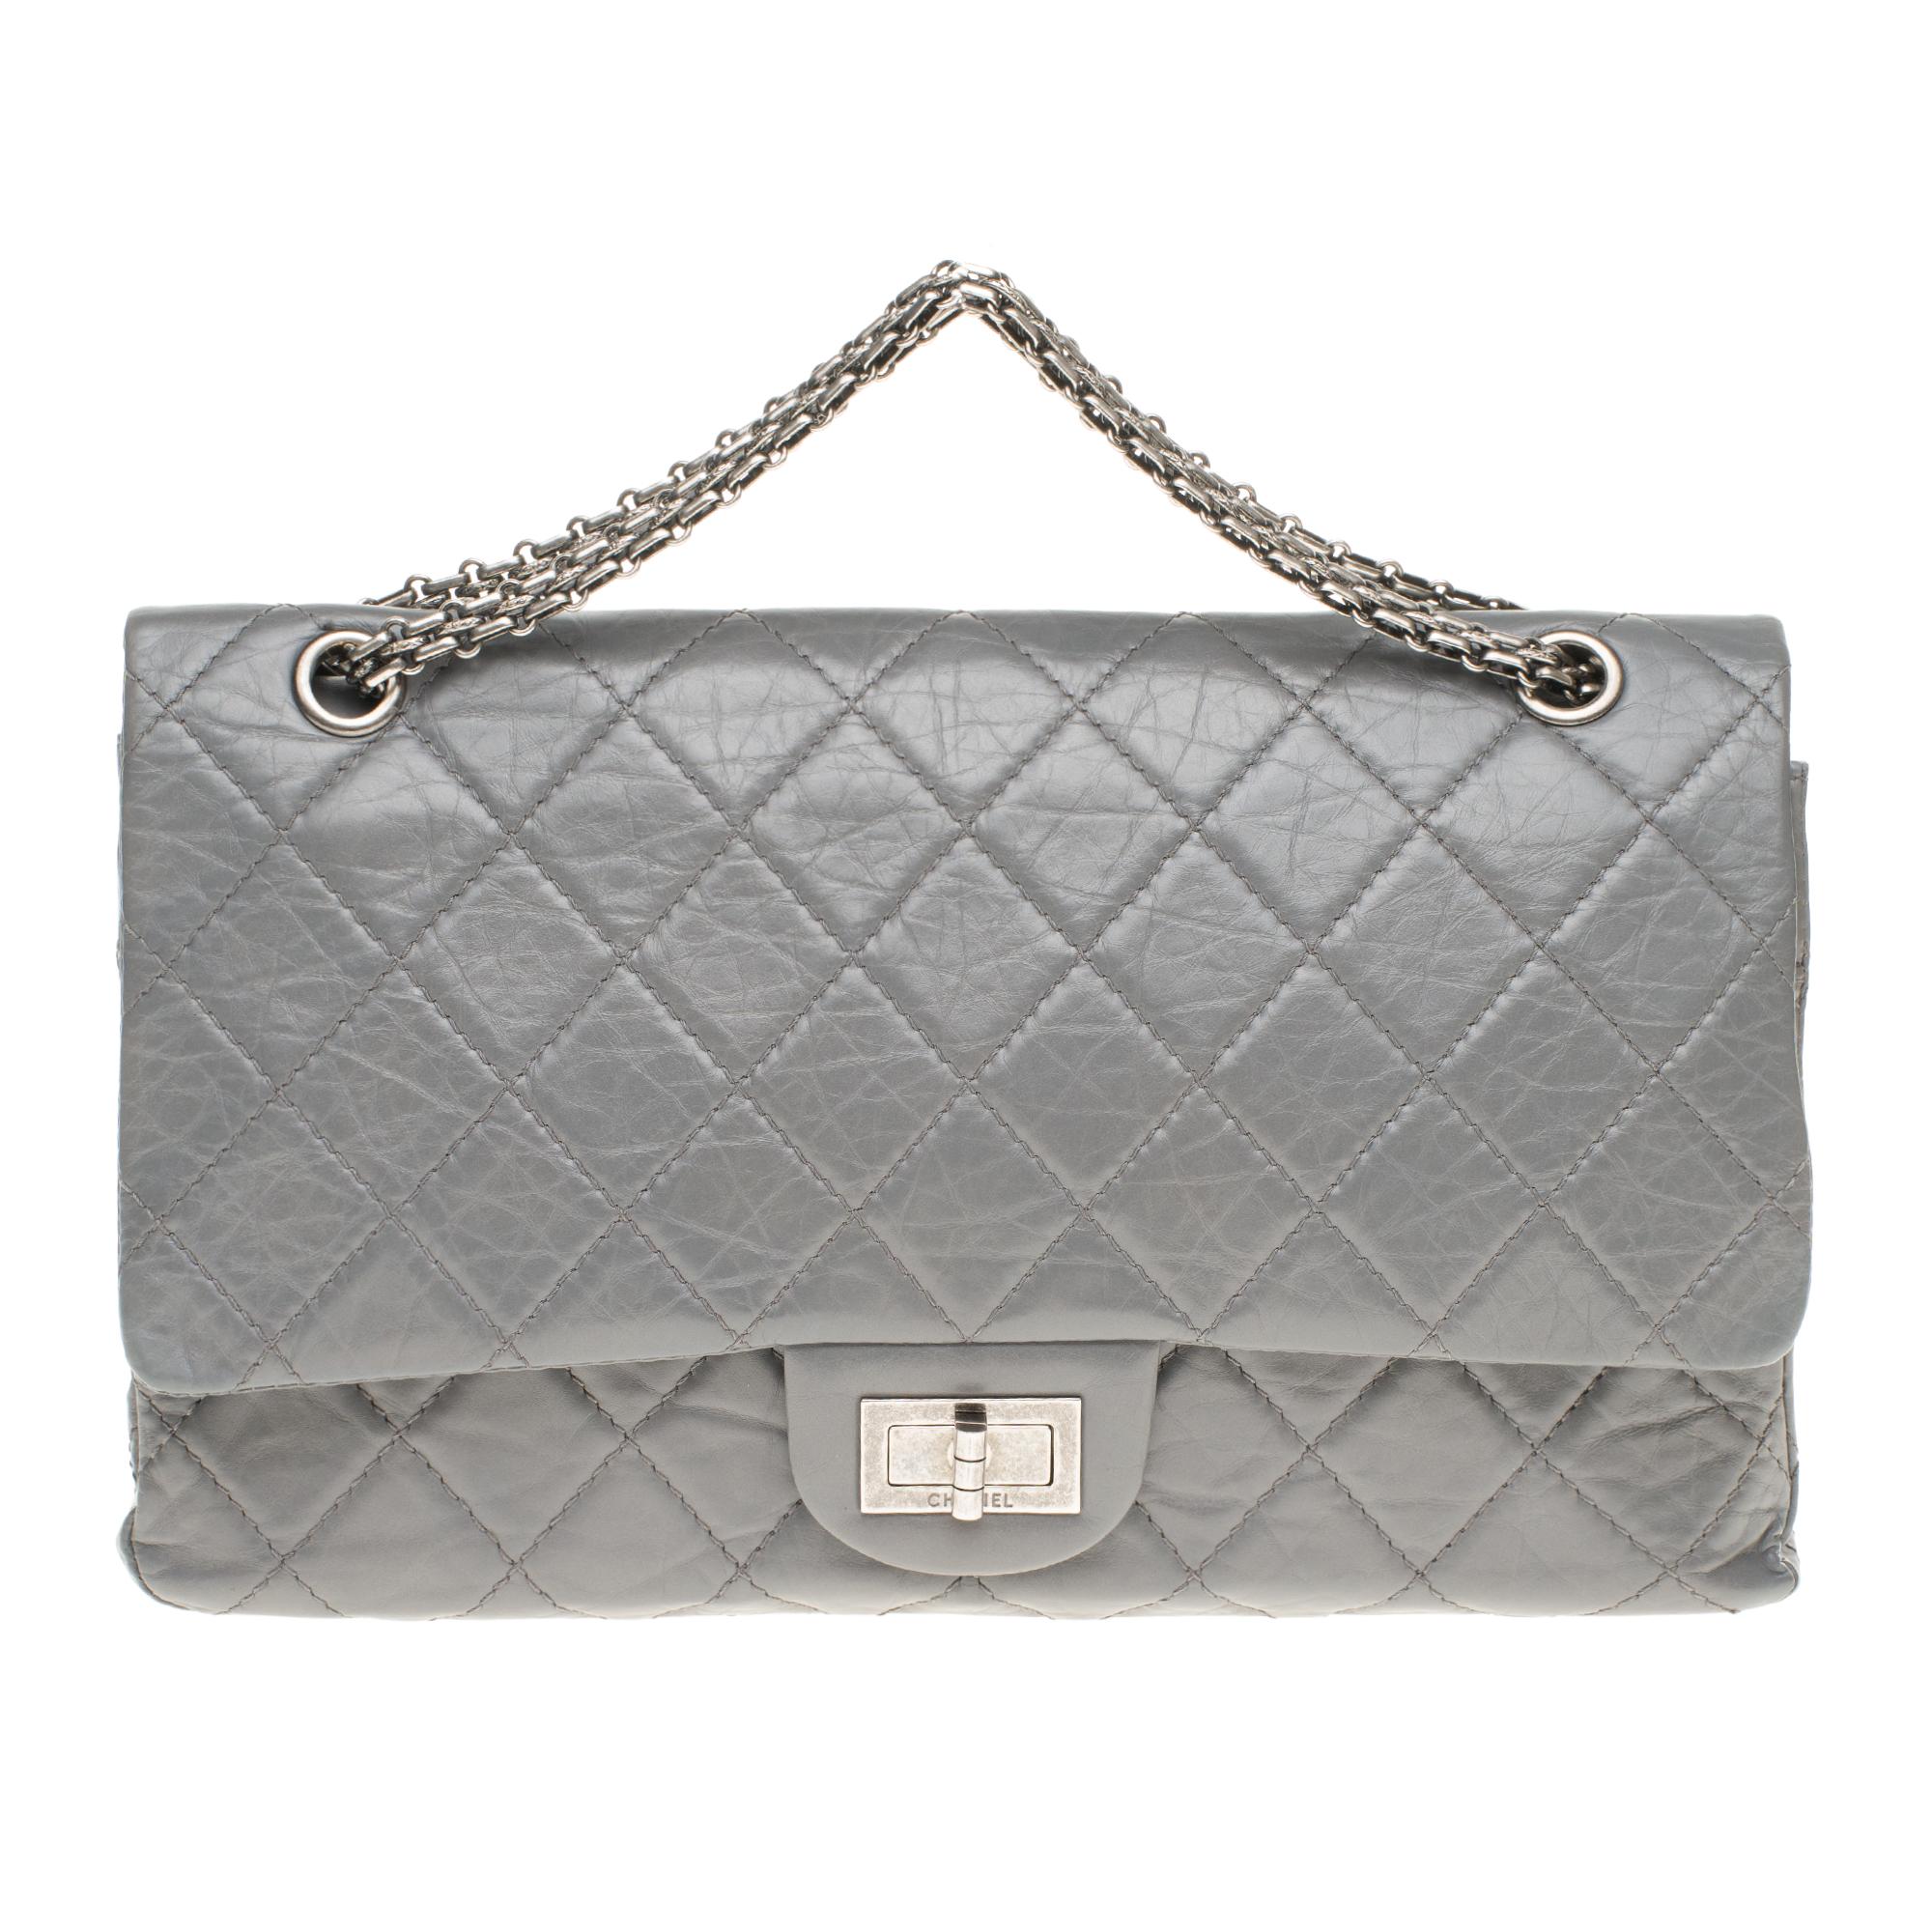 Majestic and just as Splendid Chanel 2.55 handbag in quilted leather color Grey aged effect, matte silver metal trim, a chain handle transformable in matte silver metal allowing a shoulder or crossbody wear.

Mademoiselle closure in matte silver